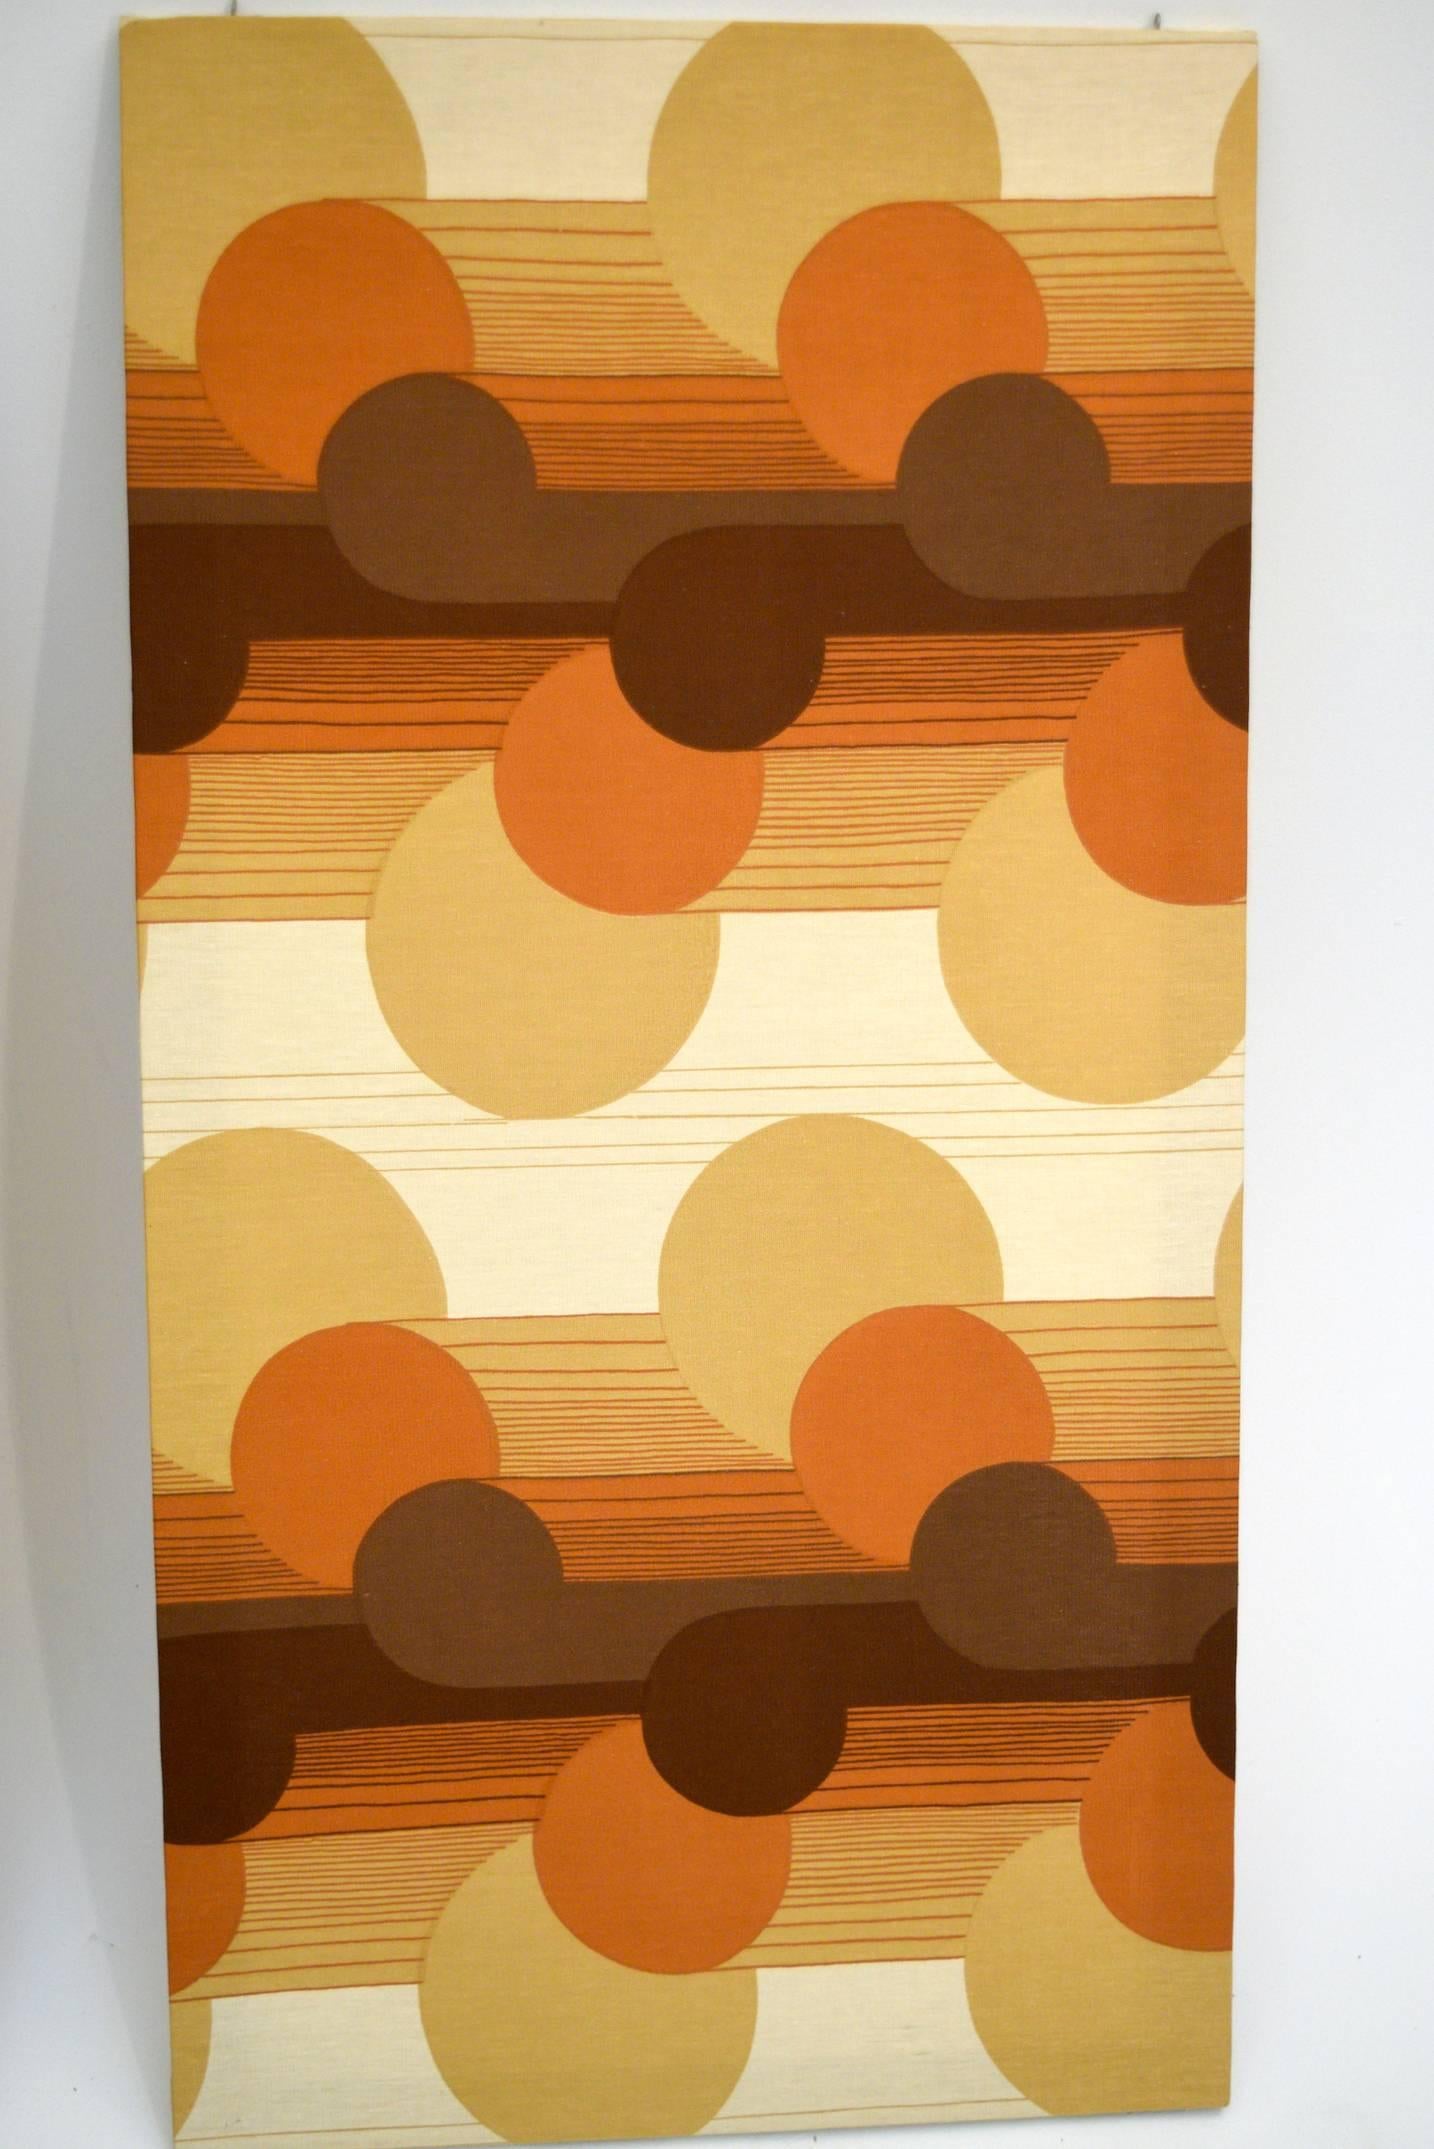 Fabric 1960s Op Art Wall Covering Panels by Three by Danes